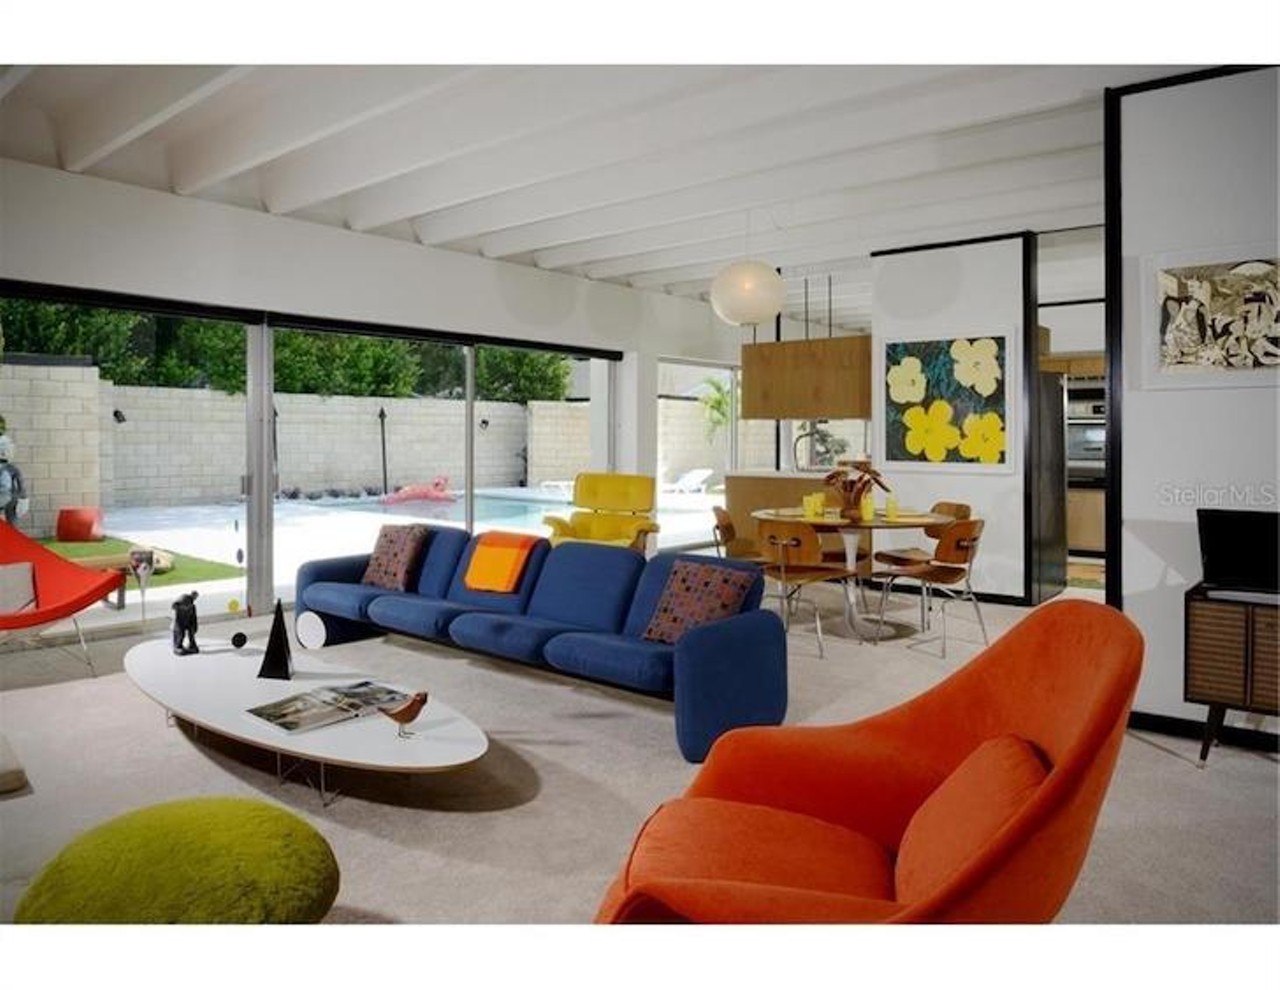 A Florida midcentury-modern gem by famed architect Gene Leedy is now for sale, and so is all the furniture